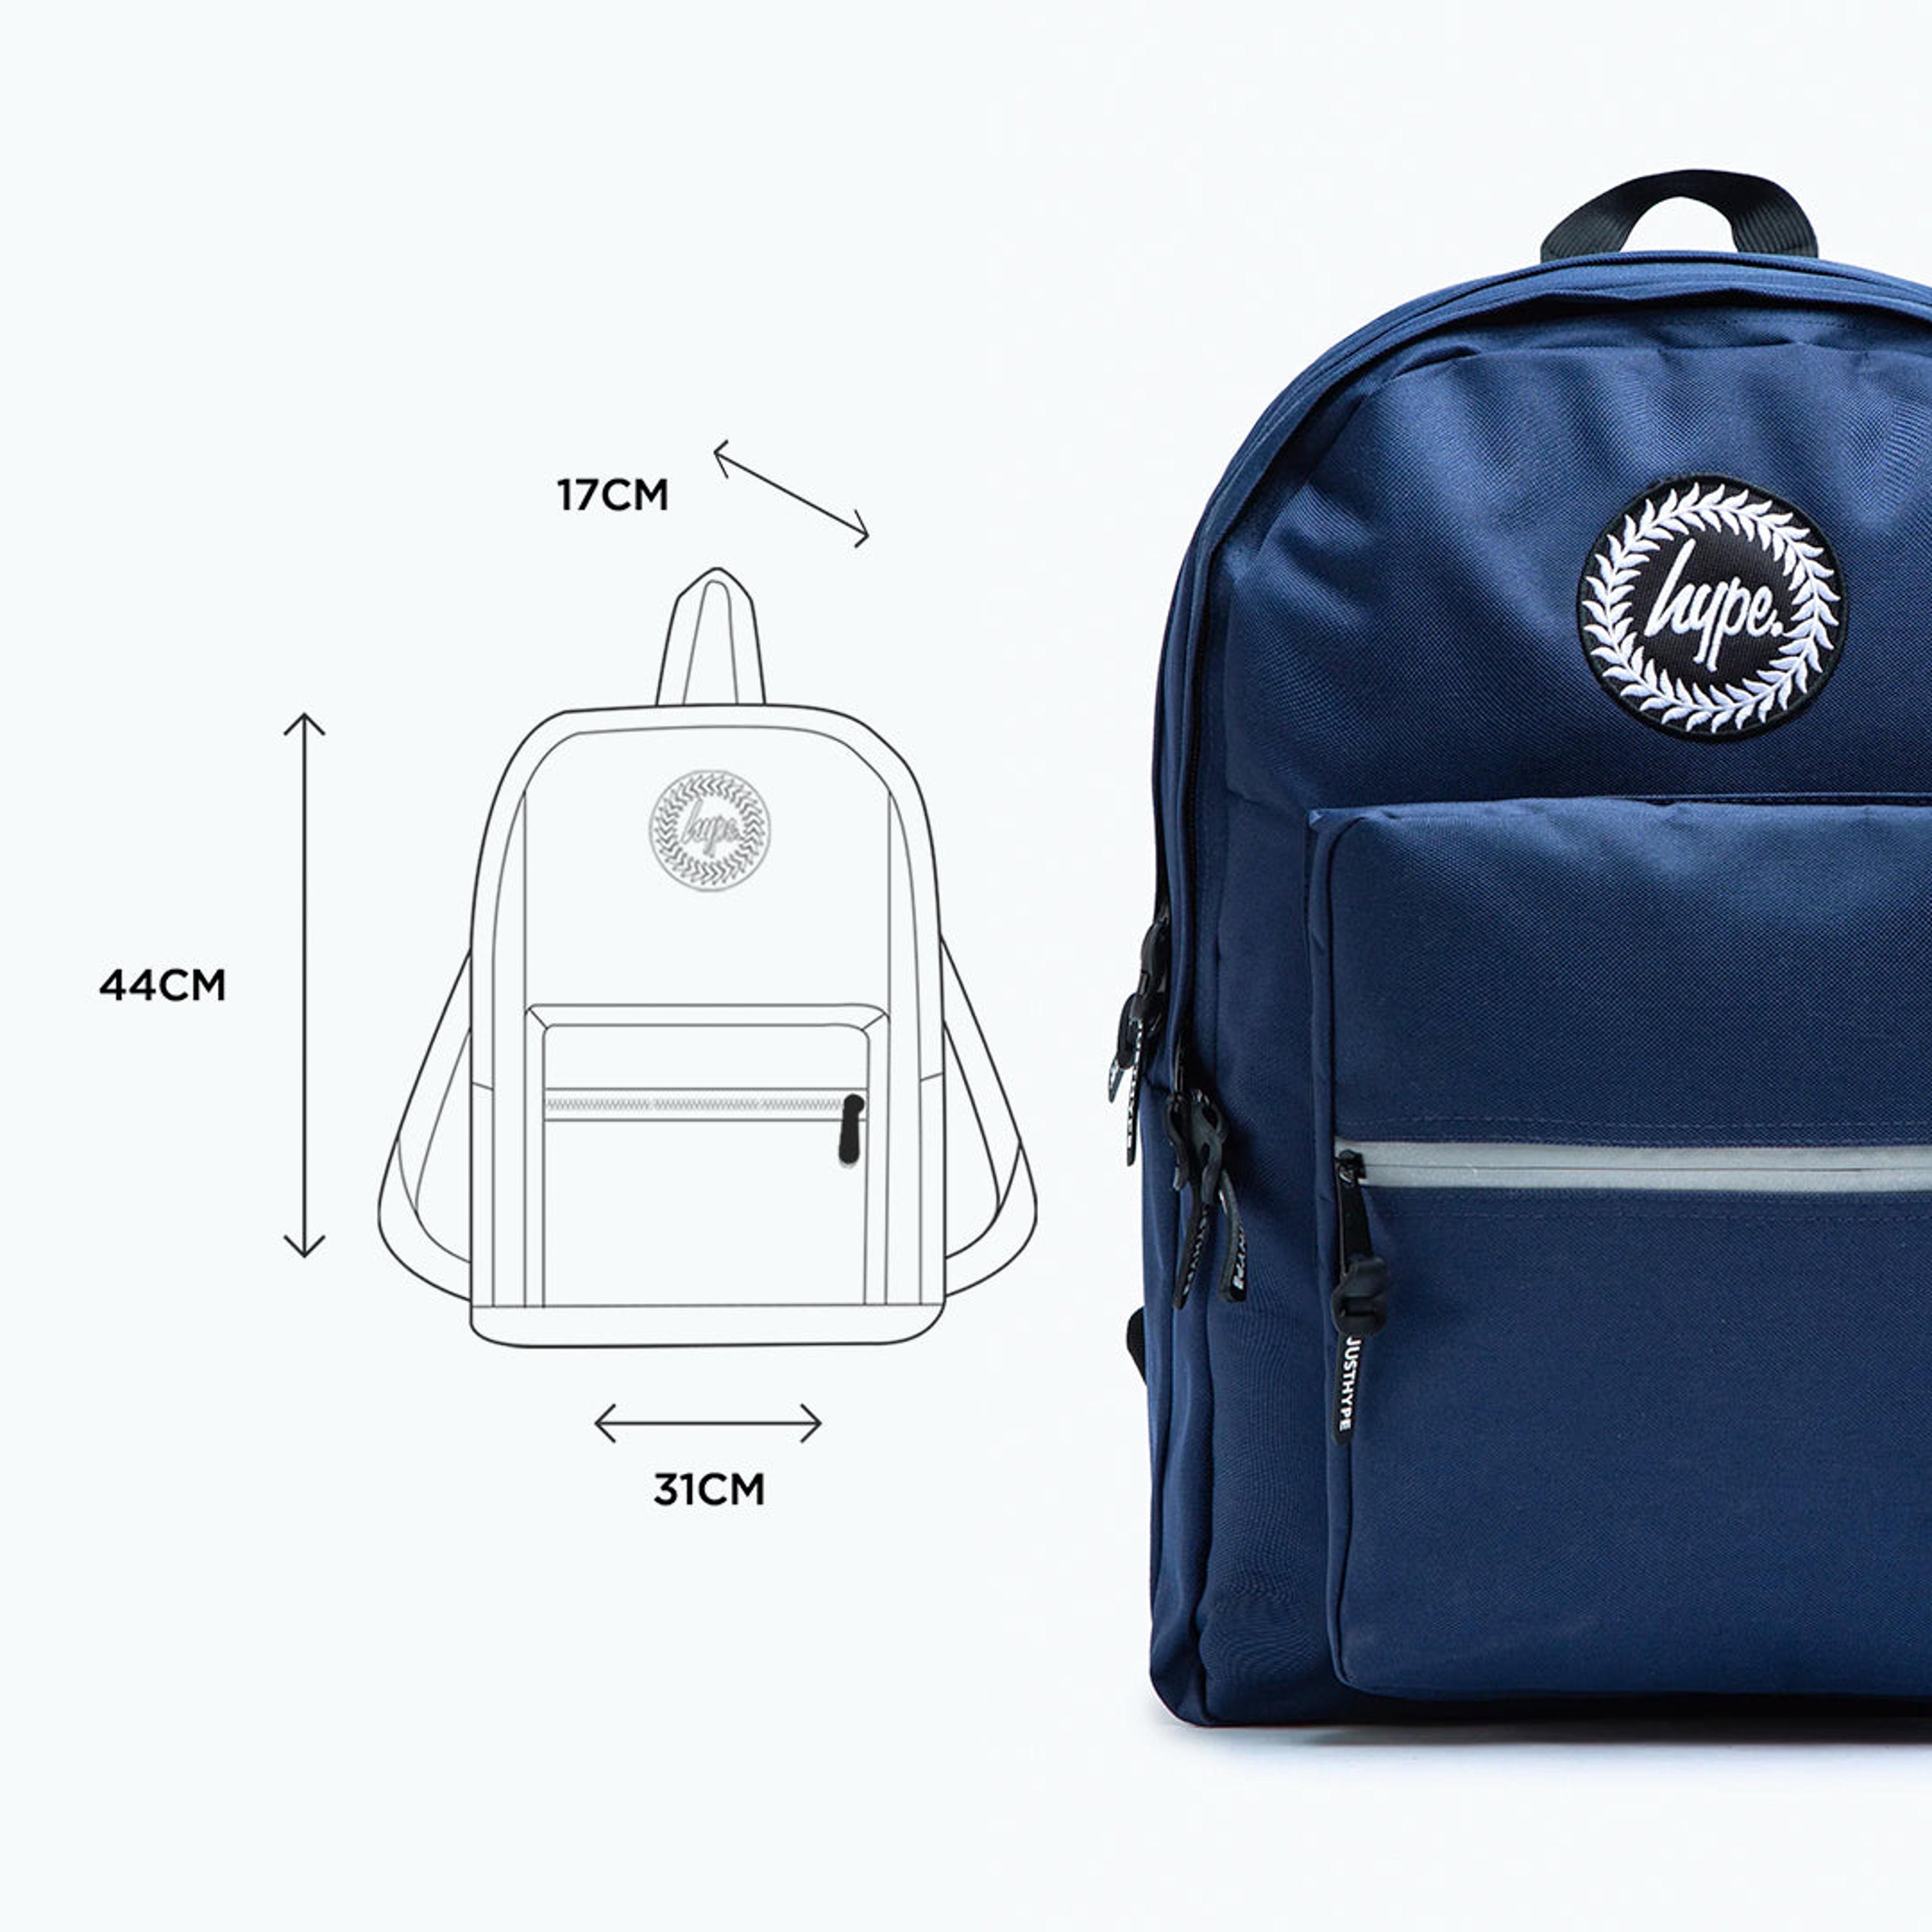 Alternate View 1 of HYPE NAVY UTILITY BACKPACK